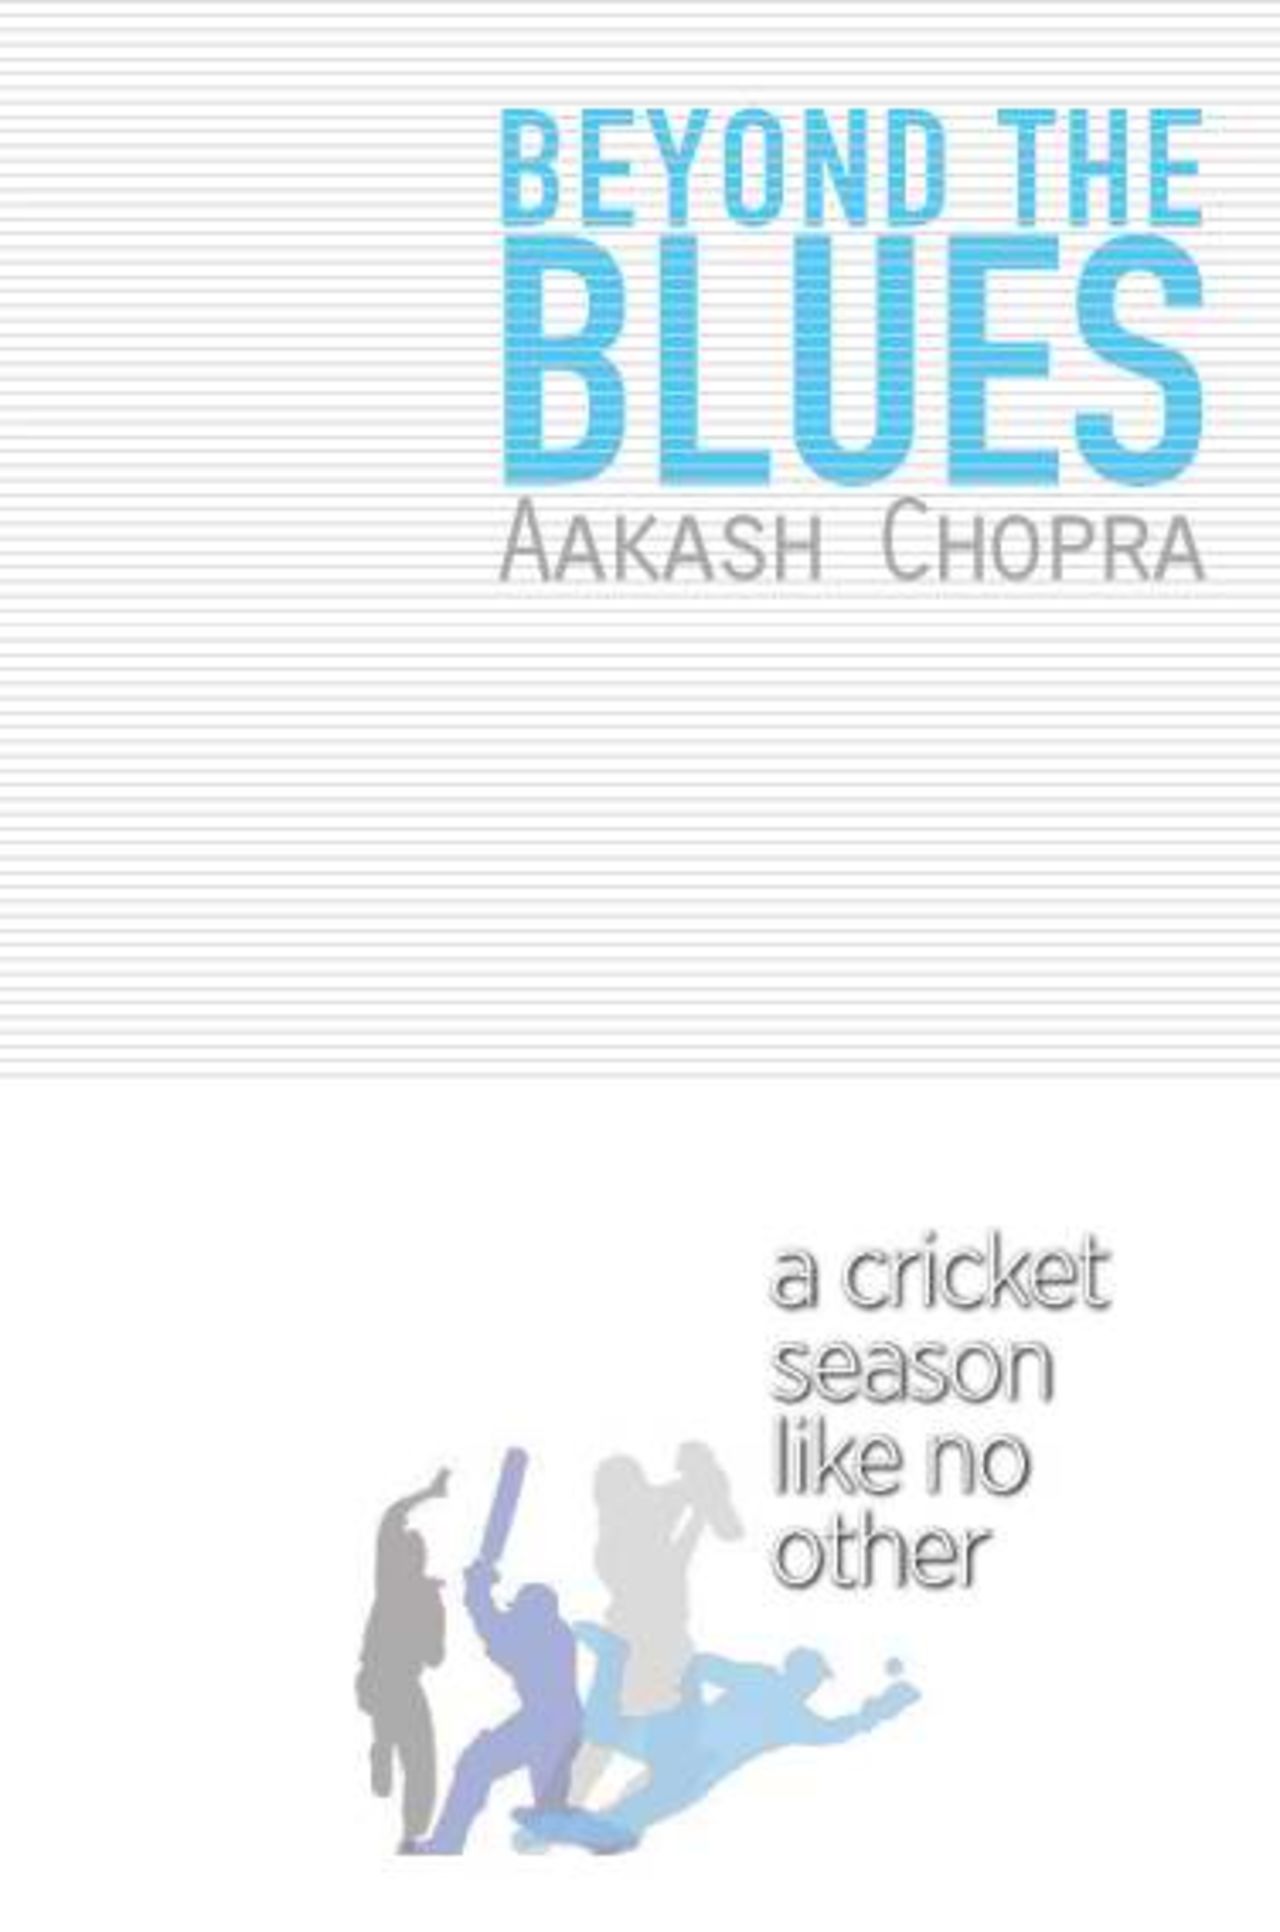 Cover image of <i>Beyond the Blues</i> by Aakash Chopra